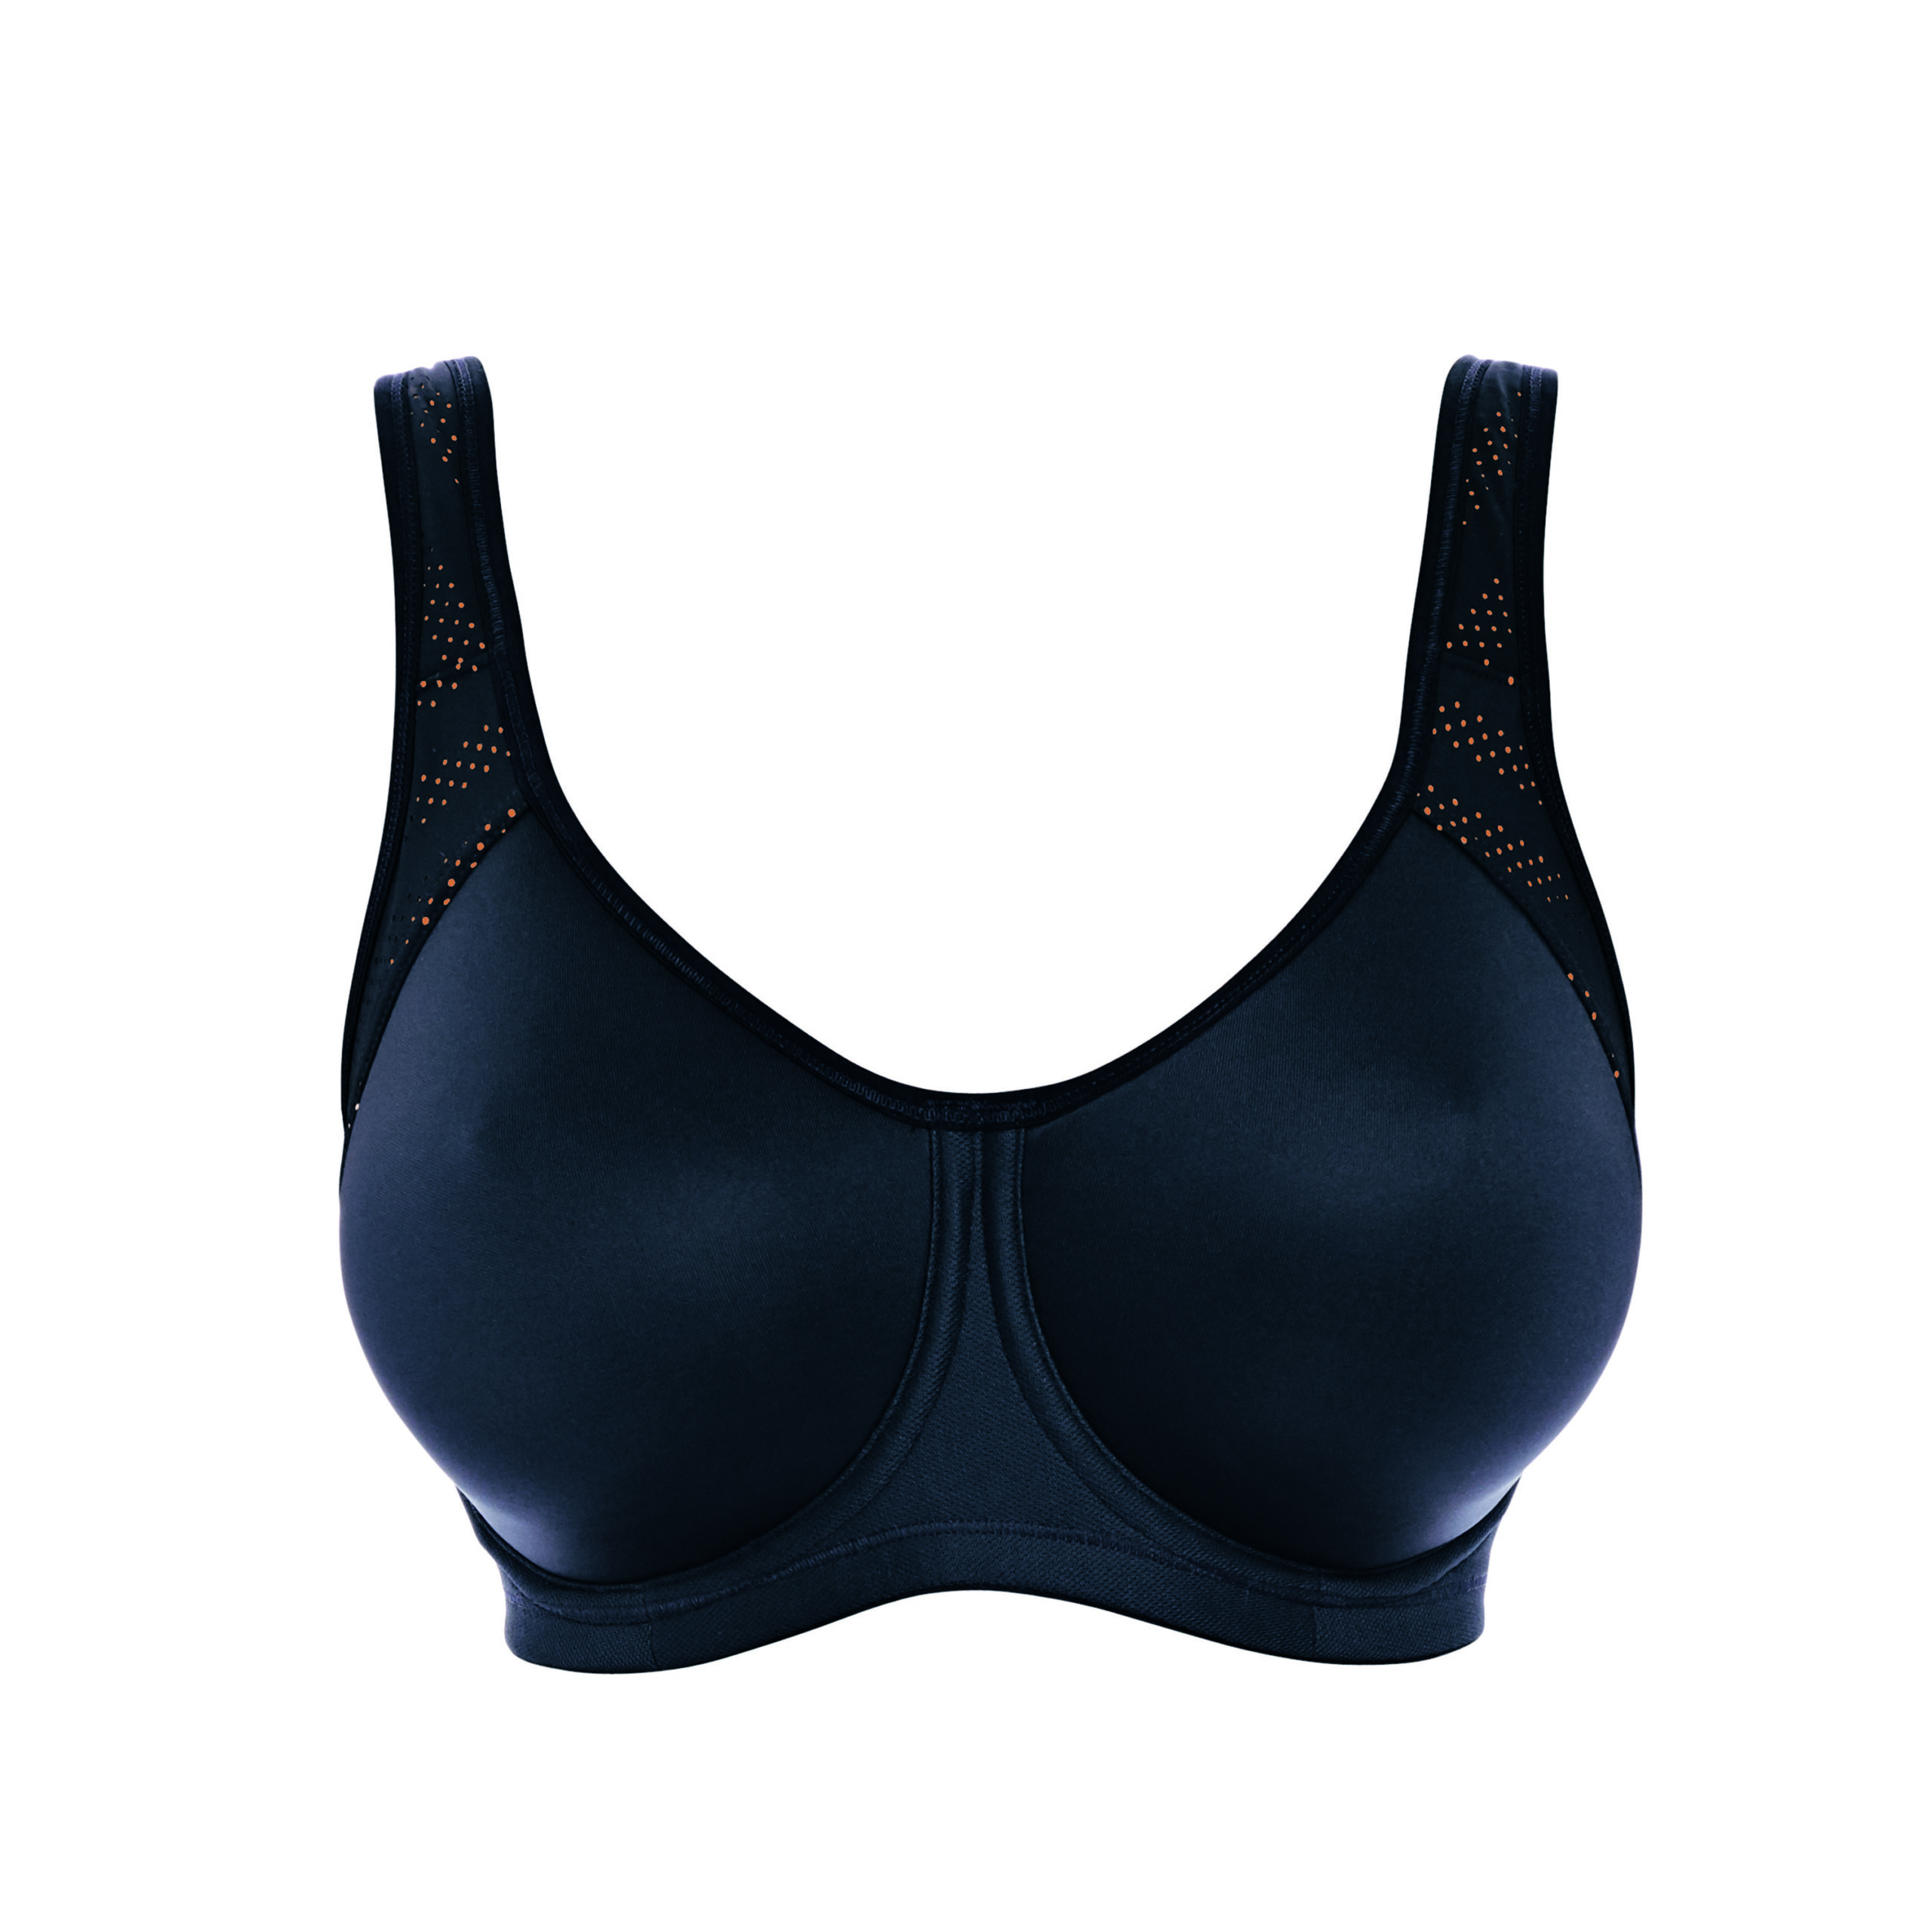 Sports bra support - cups